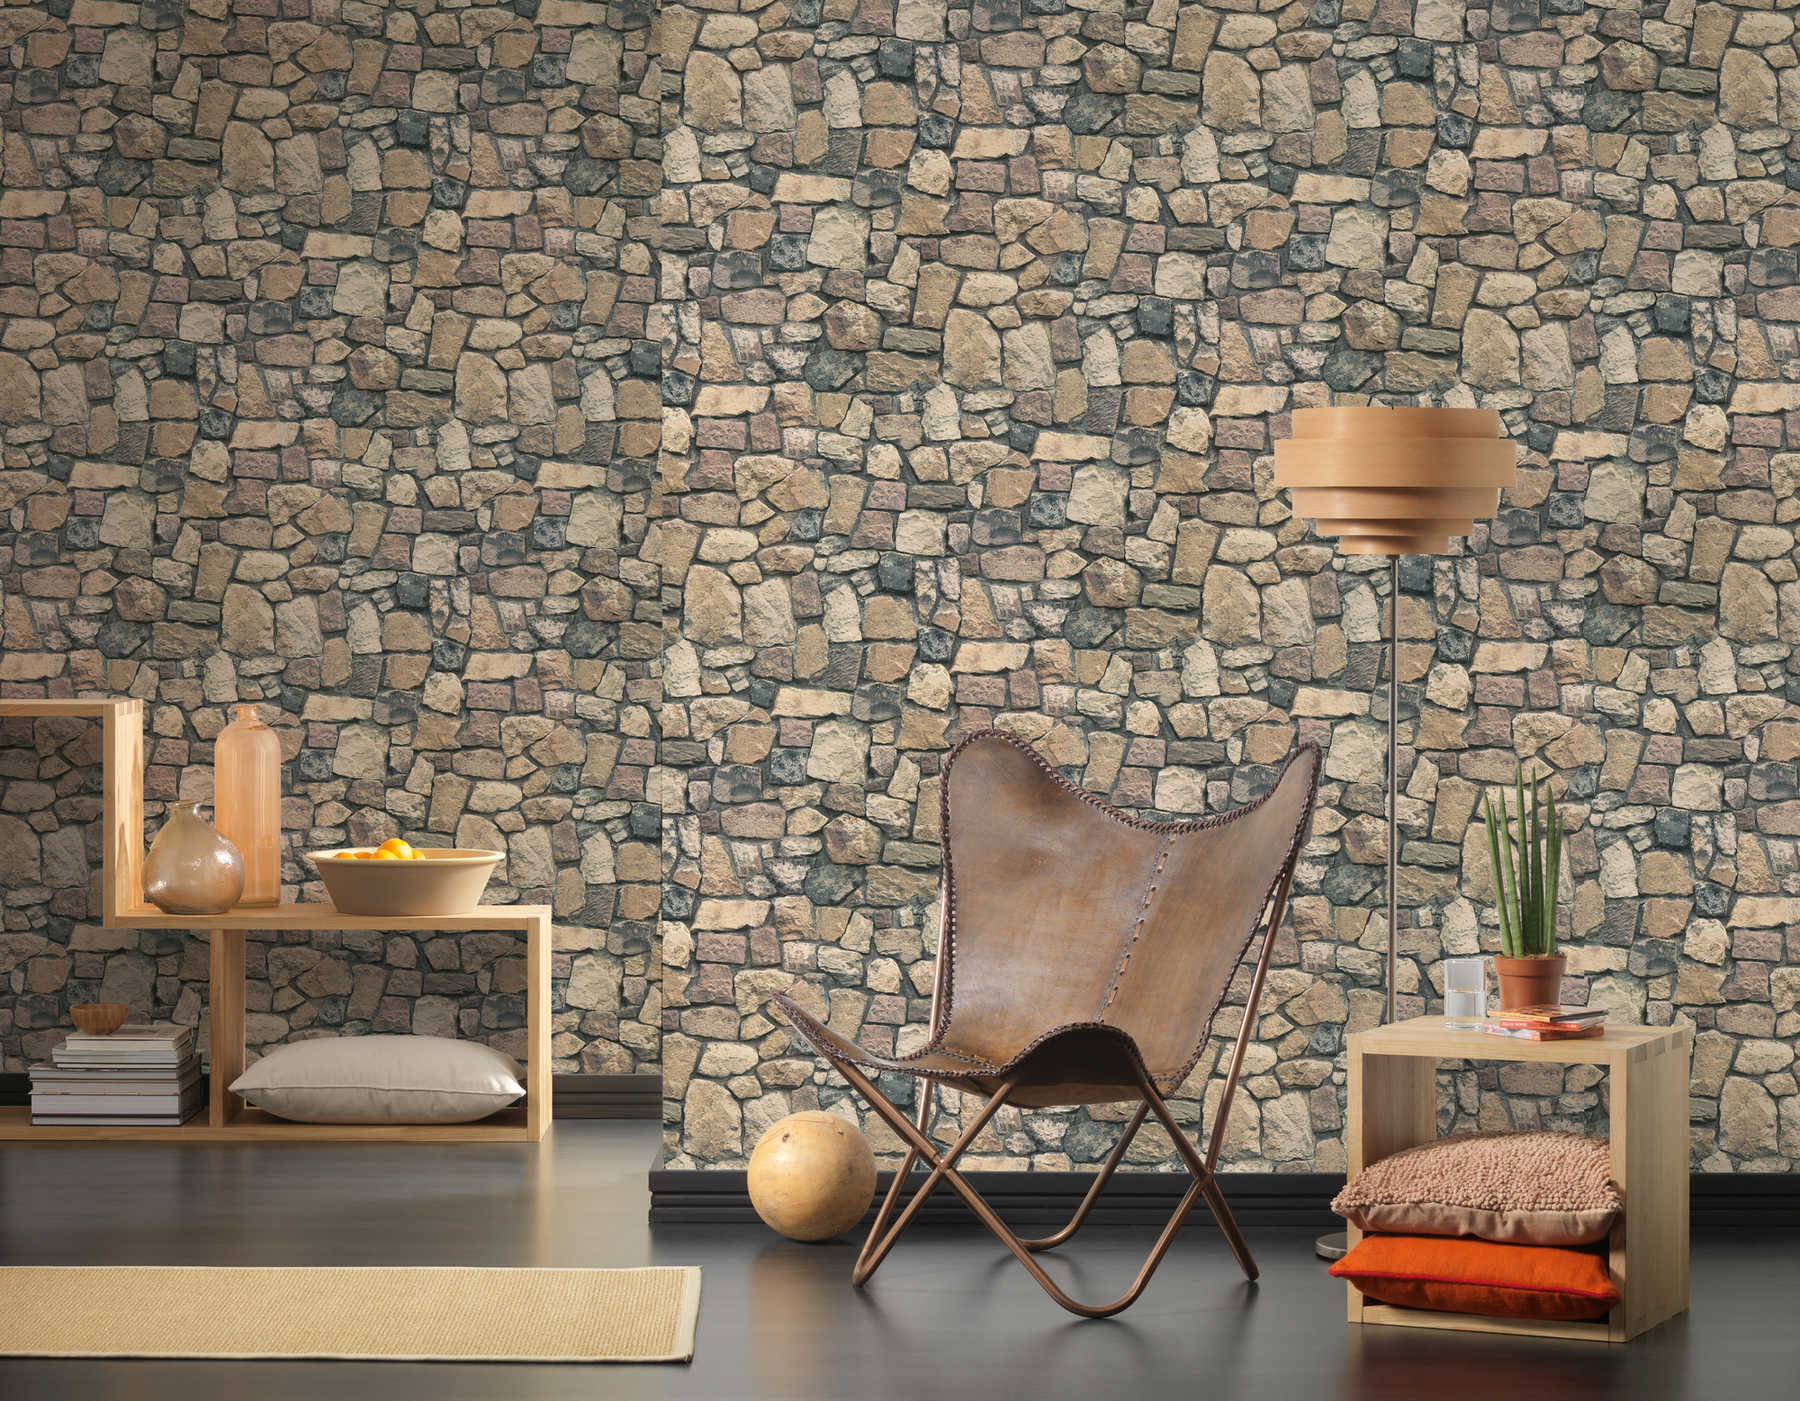             Non-woven wallpaper wall optics with 3D natural stones - colourful
        